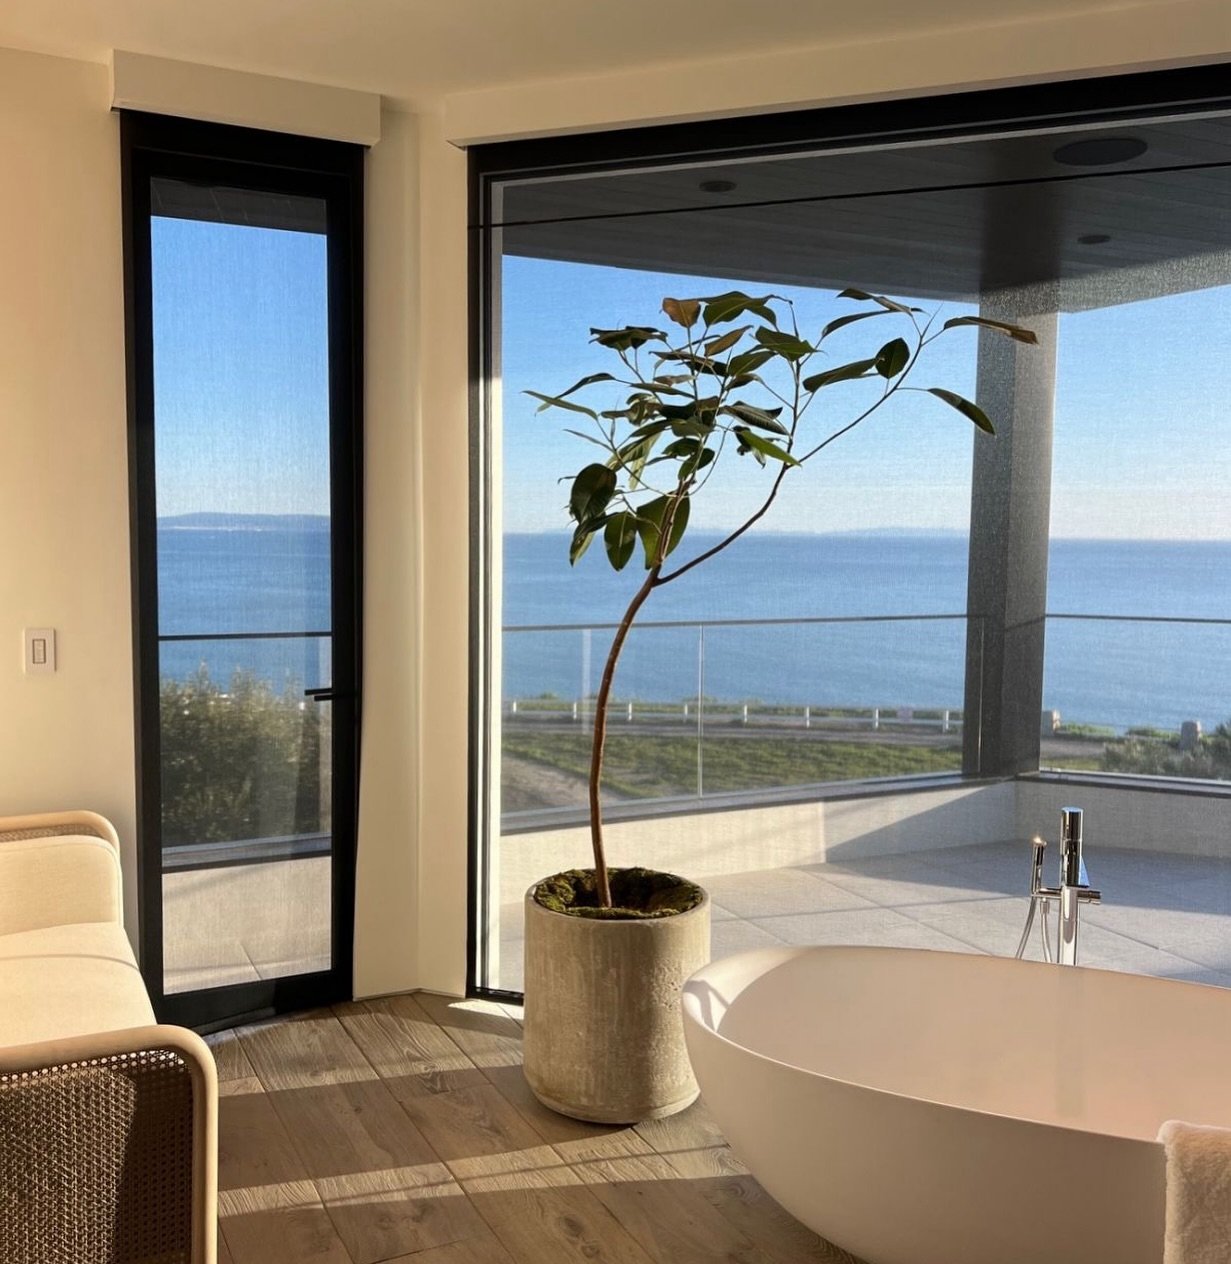 Shhhh&hellip; A sneak peek from our Palisades project. 🤫 #sneakpeek 

A bath thub with an ocean view is not just a bath - it&rsquo;s a serene voyage into luxury. ✨ Every detail has been thoughtfully considered to offer the ultimate relaxation experi